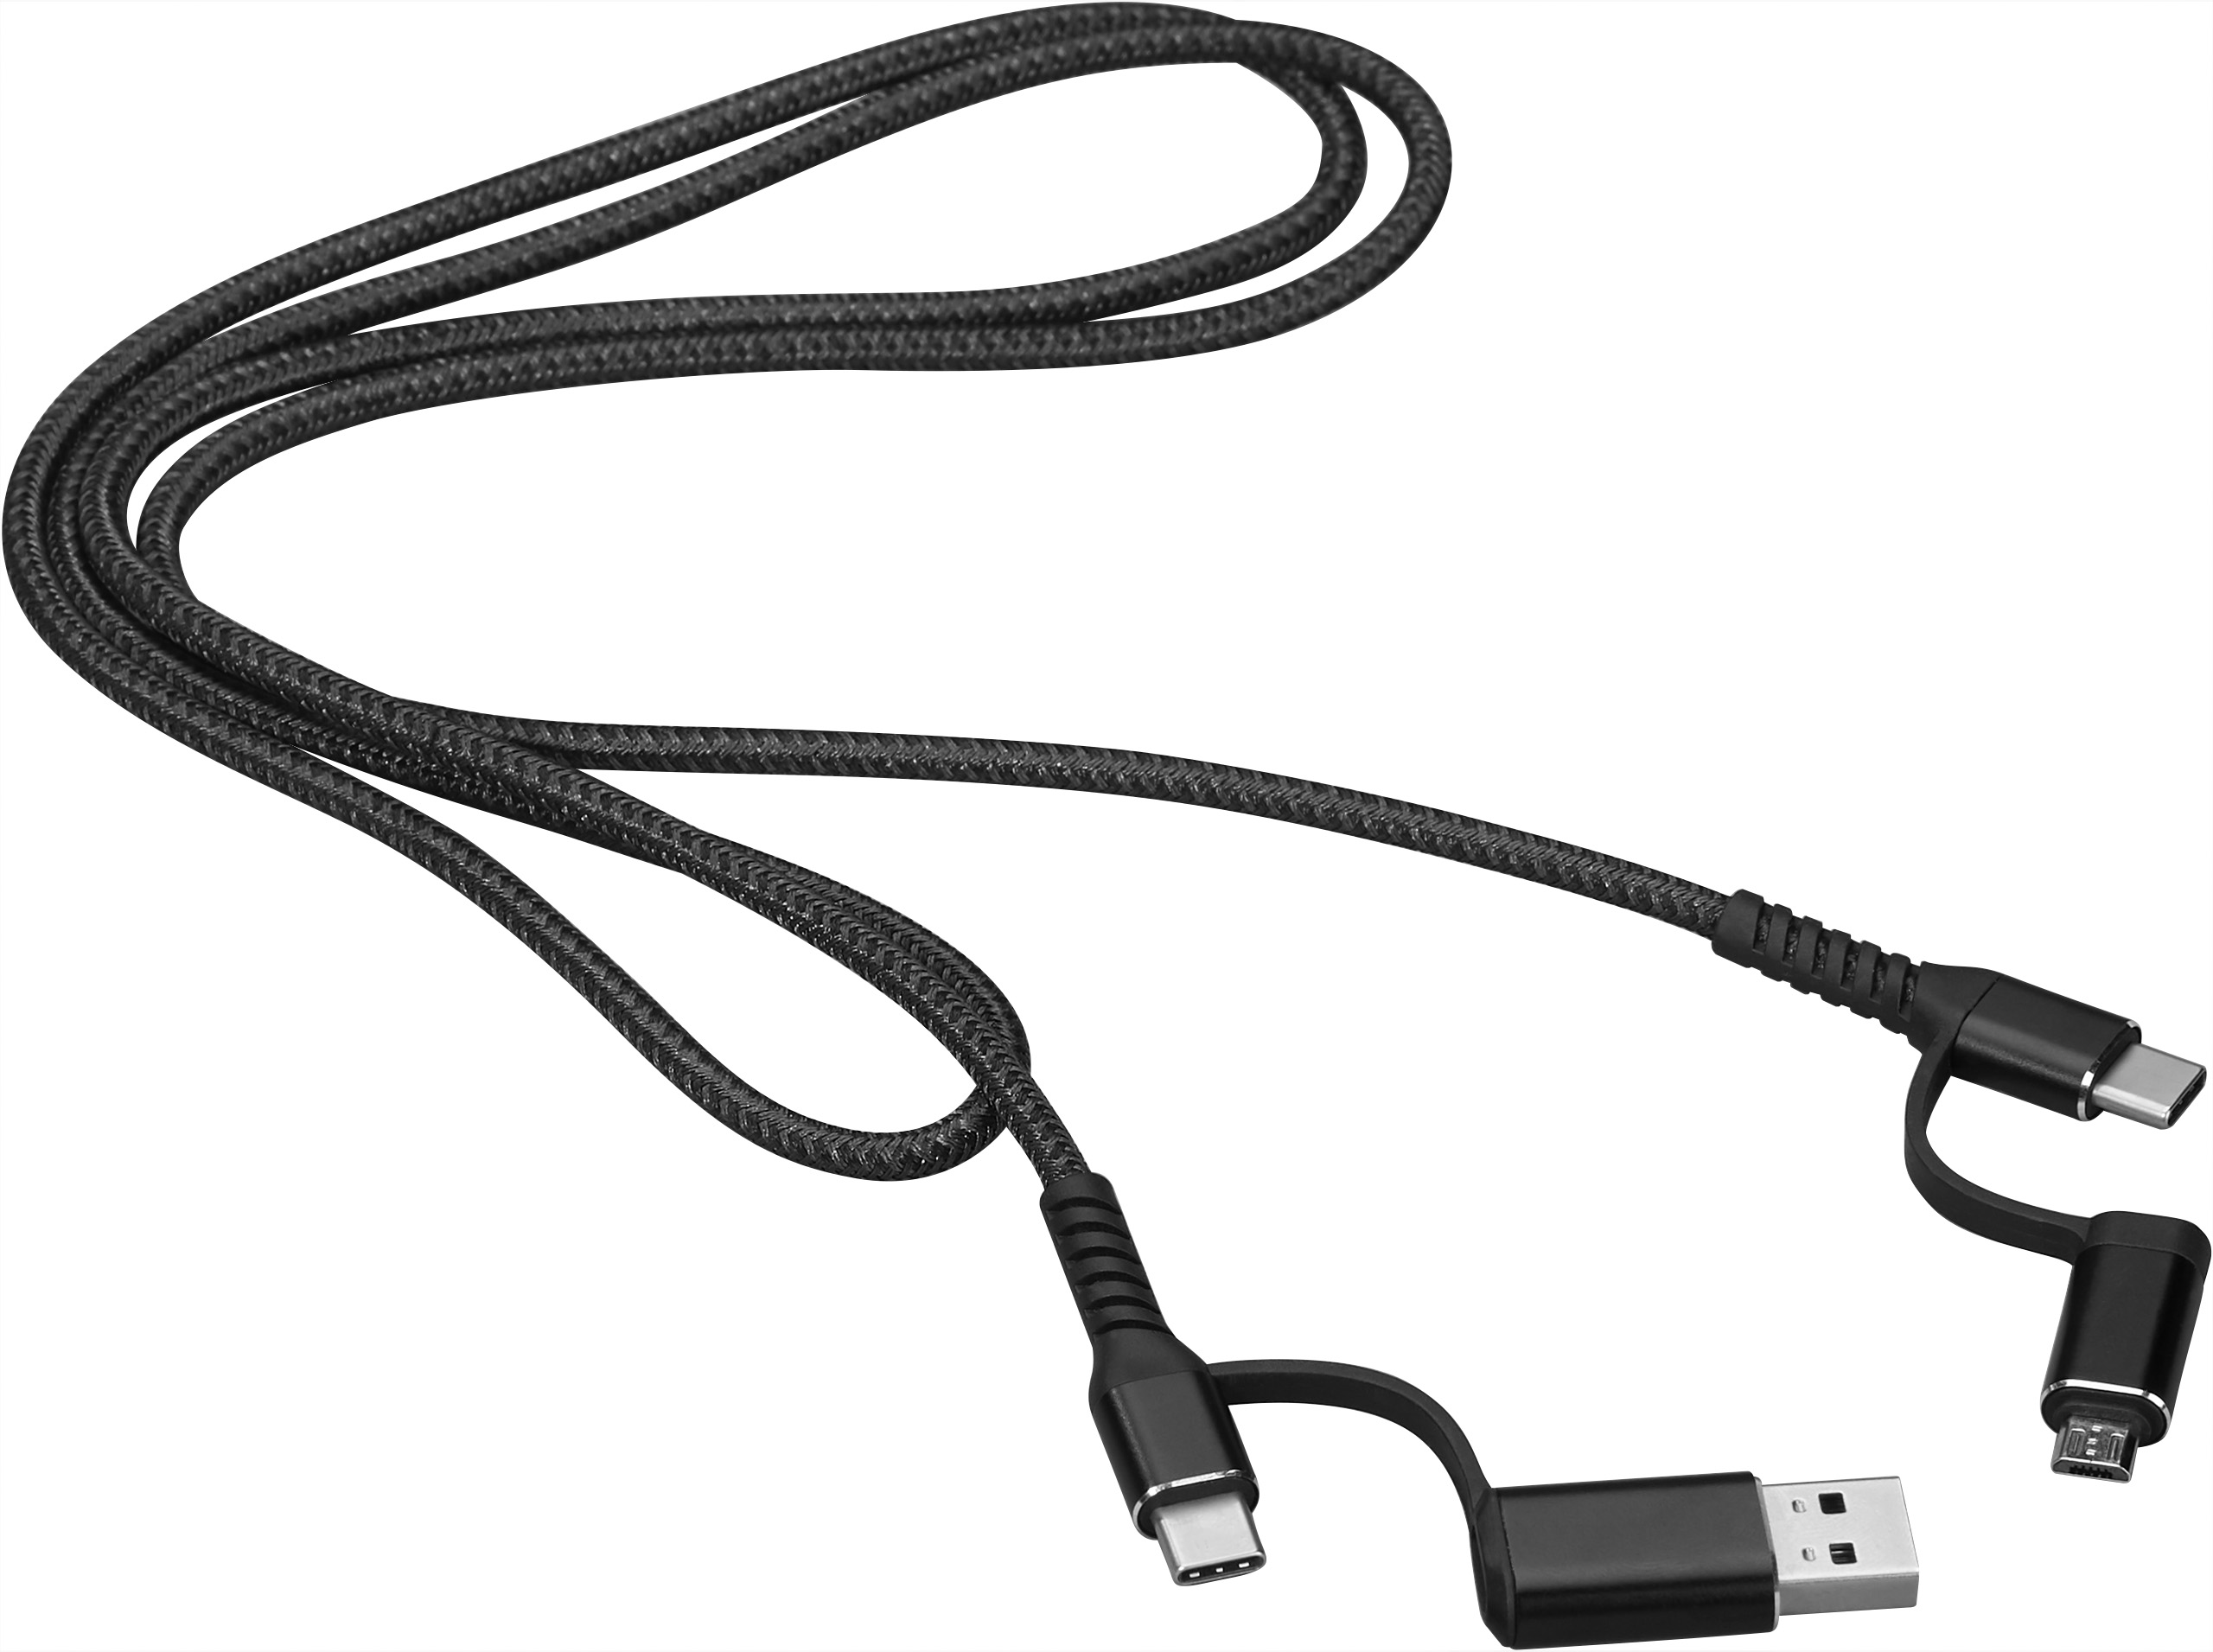 4-in-1 cable